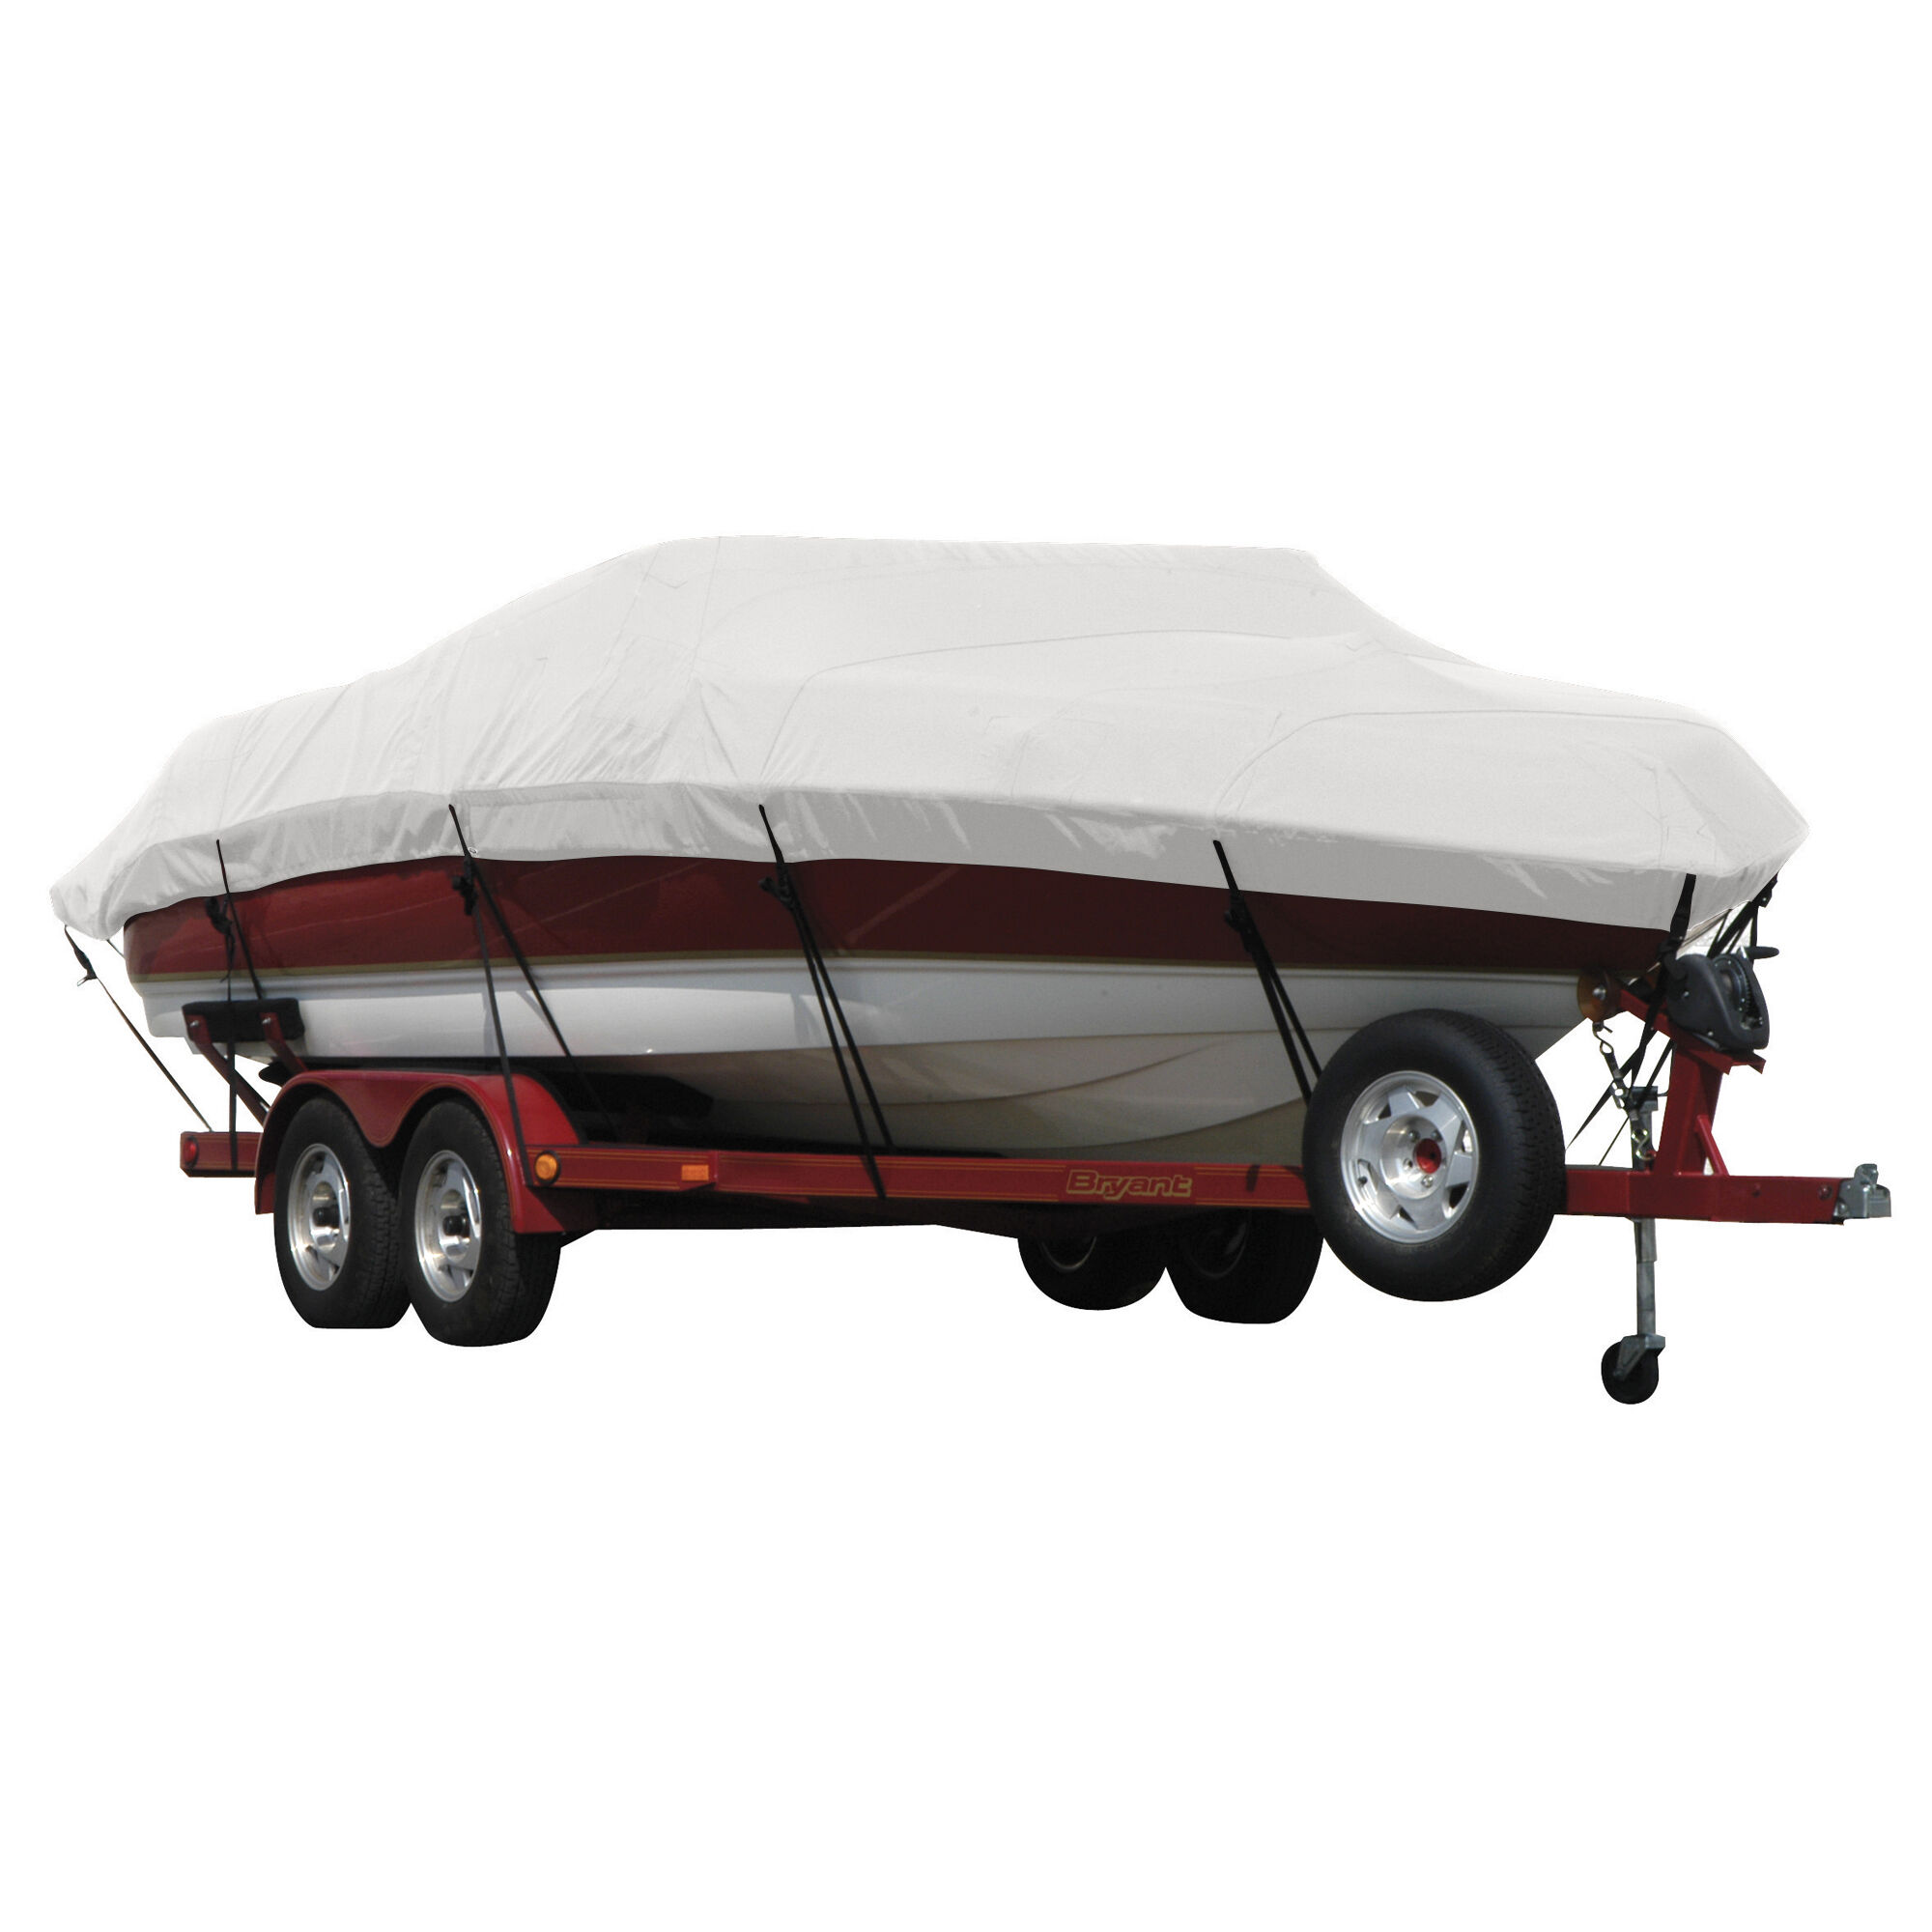 Covermate Exact Fit Sunbrella Boat Cover for Tracker Tundra 21 Wt Tundra 21 Wt w/ Port Motorguide Trolling Motor O/B. Natural in Natural Tan